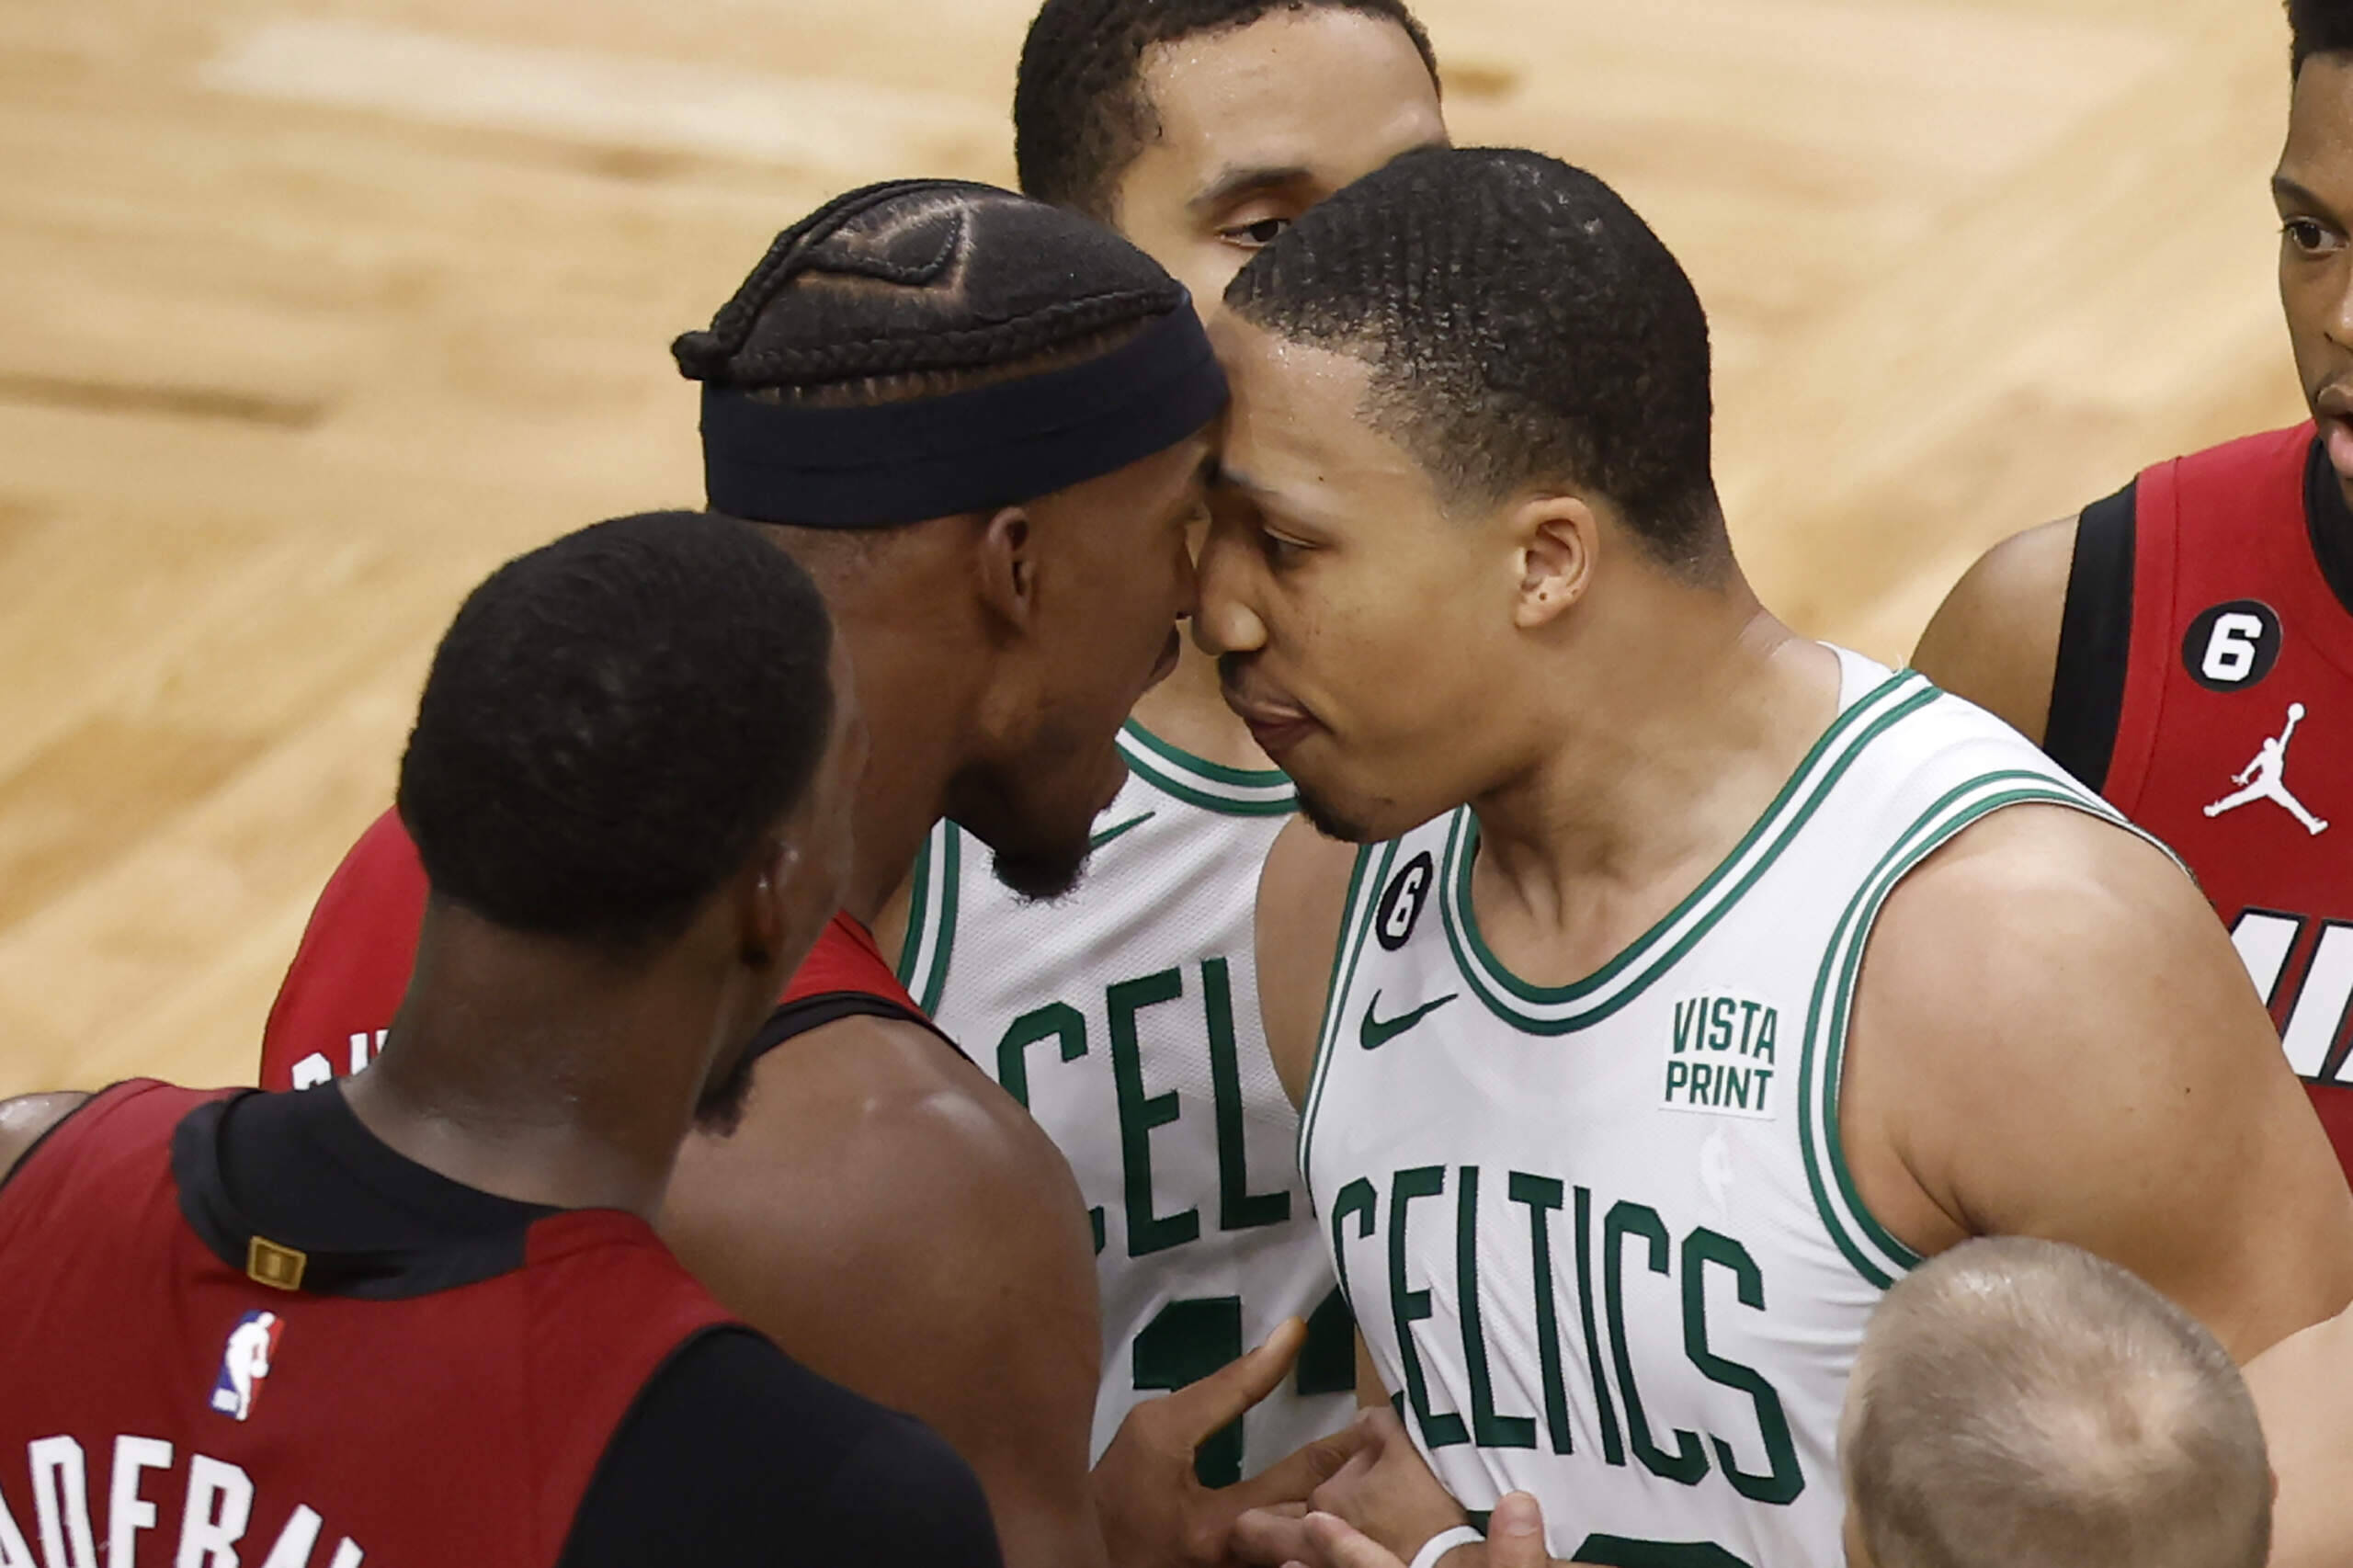 Miami Heat forward Jimmy Butler, center left, has words with Boston Celtics forward Grant Williams, center right, during the second half of Game 2 of the NBA basketball playoffs Eastern Conference finals in Boston, Friday, May 19, 2023. (Michael Dwyer/AP)